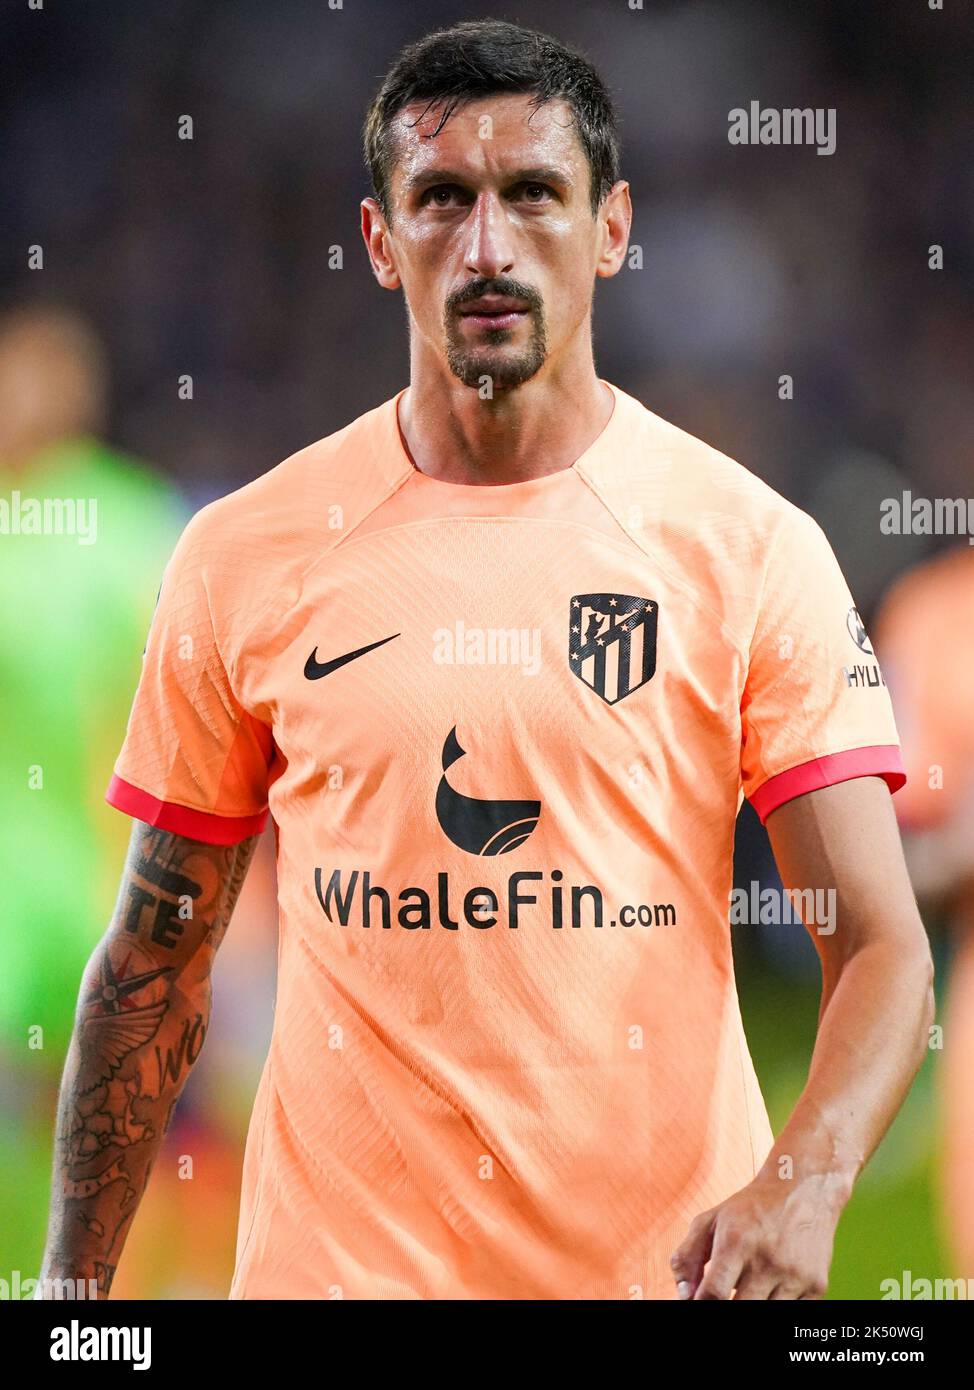 BRUGGES, BELGIUM - OCTOBER 4: Stefan Savic of Atletico Madrid looks dejected after the Group B - UEFA Champions League match between Club Brugge KV and Atletico Madrid at the Jan Breydelstadion on October 4, 2022 in Brugges, Belgium (Photo by Joris Verwijst/Orange Pictures) Stock Photo